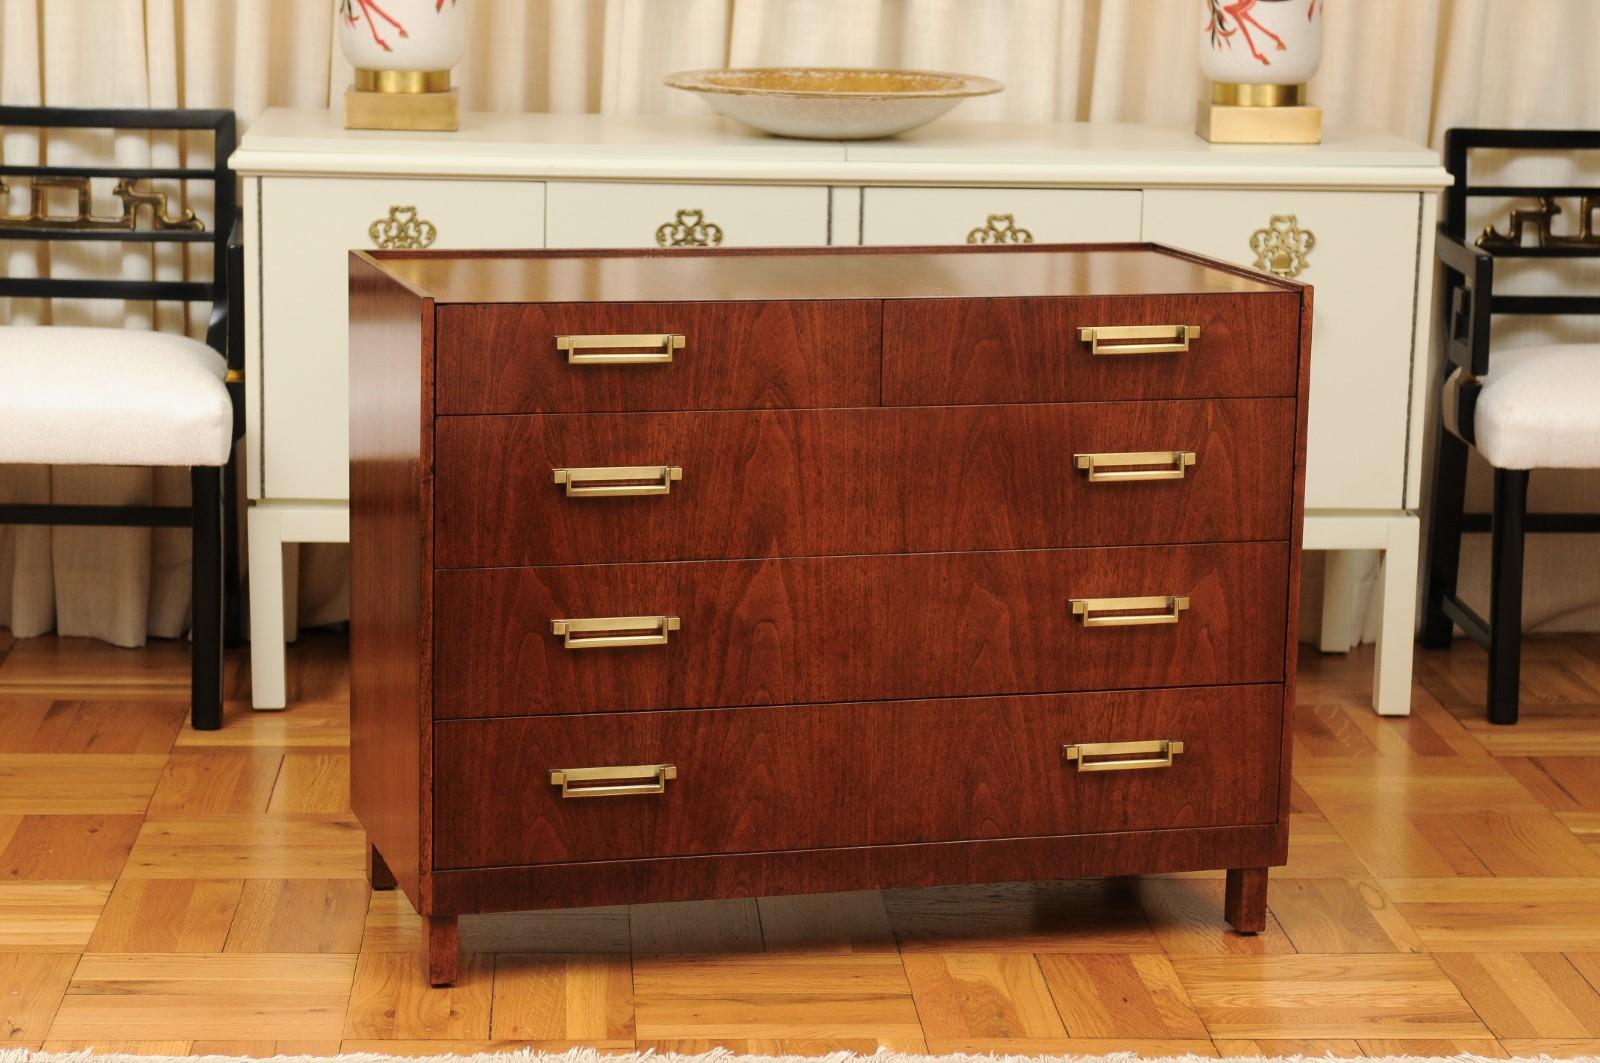 This magnificent chest is shipped as professionally photographed and described in the listing narrative: Meticulously professionally restored and completely installation ready.

Michael Taylor's fabulous modern interpretation of the classic Campaign